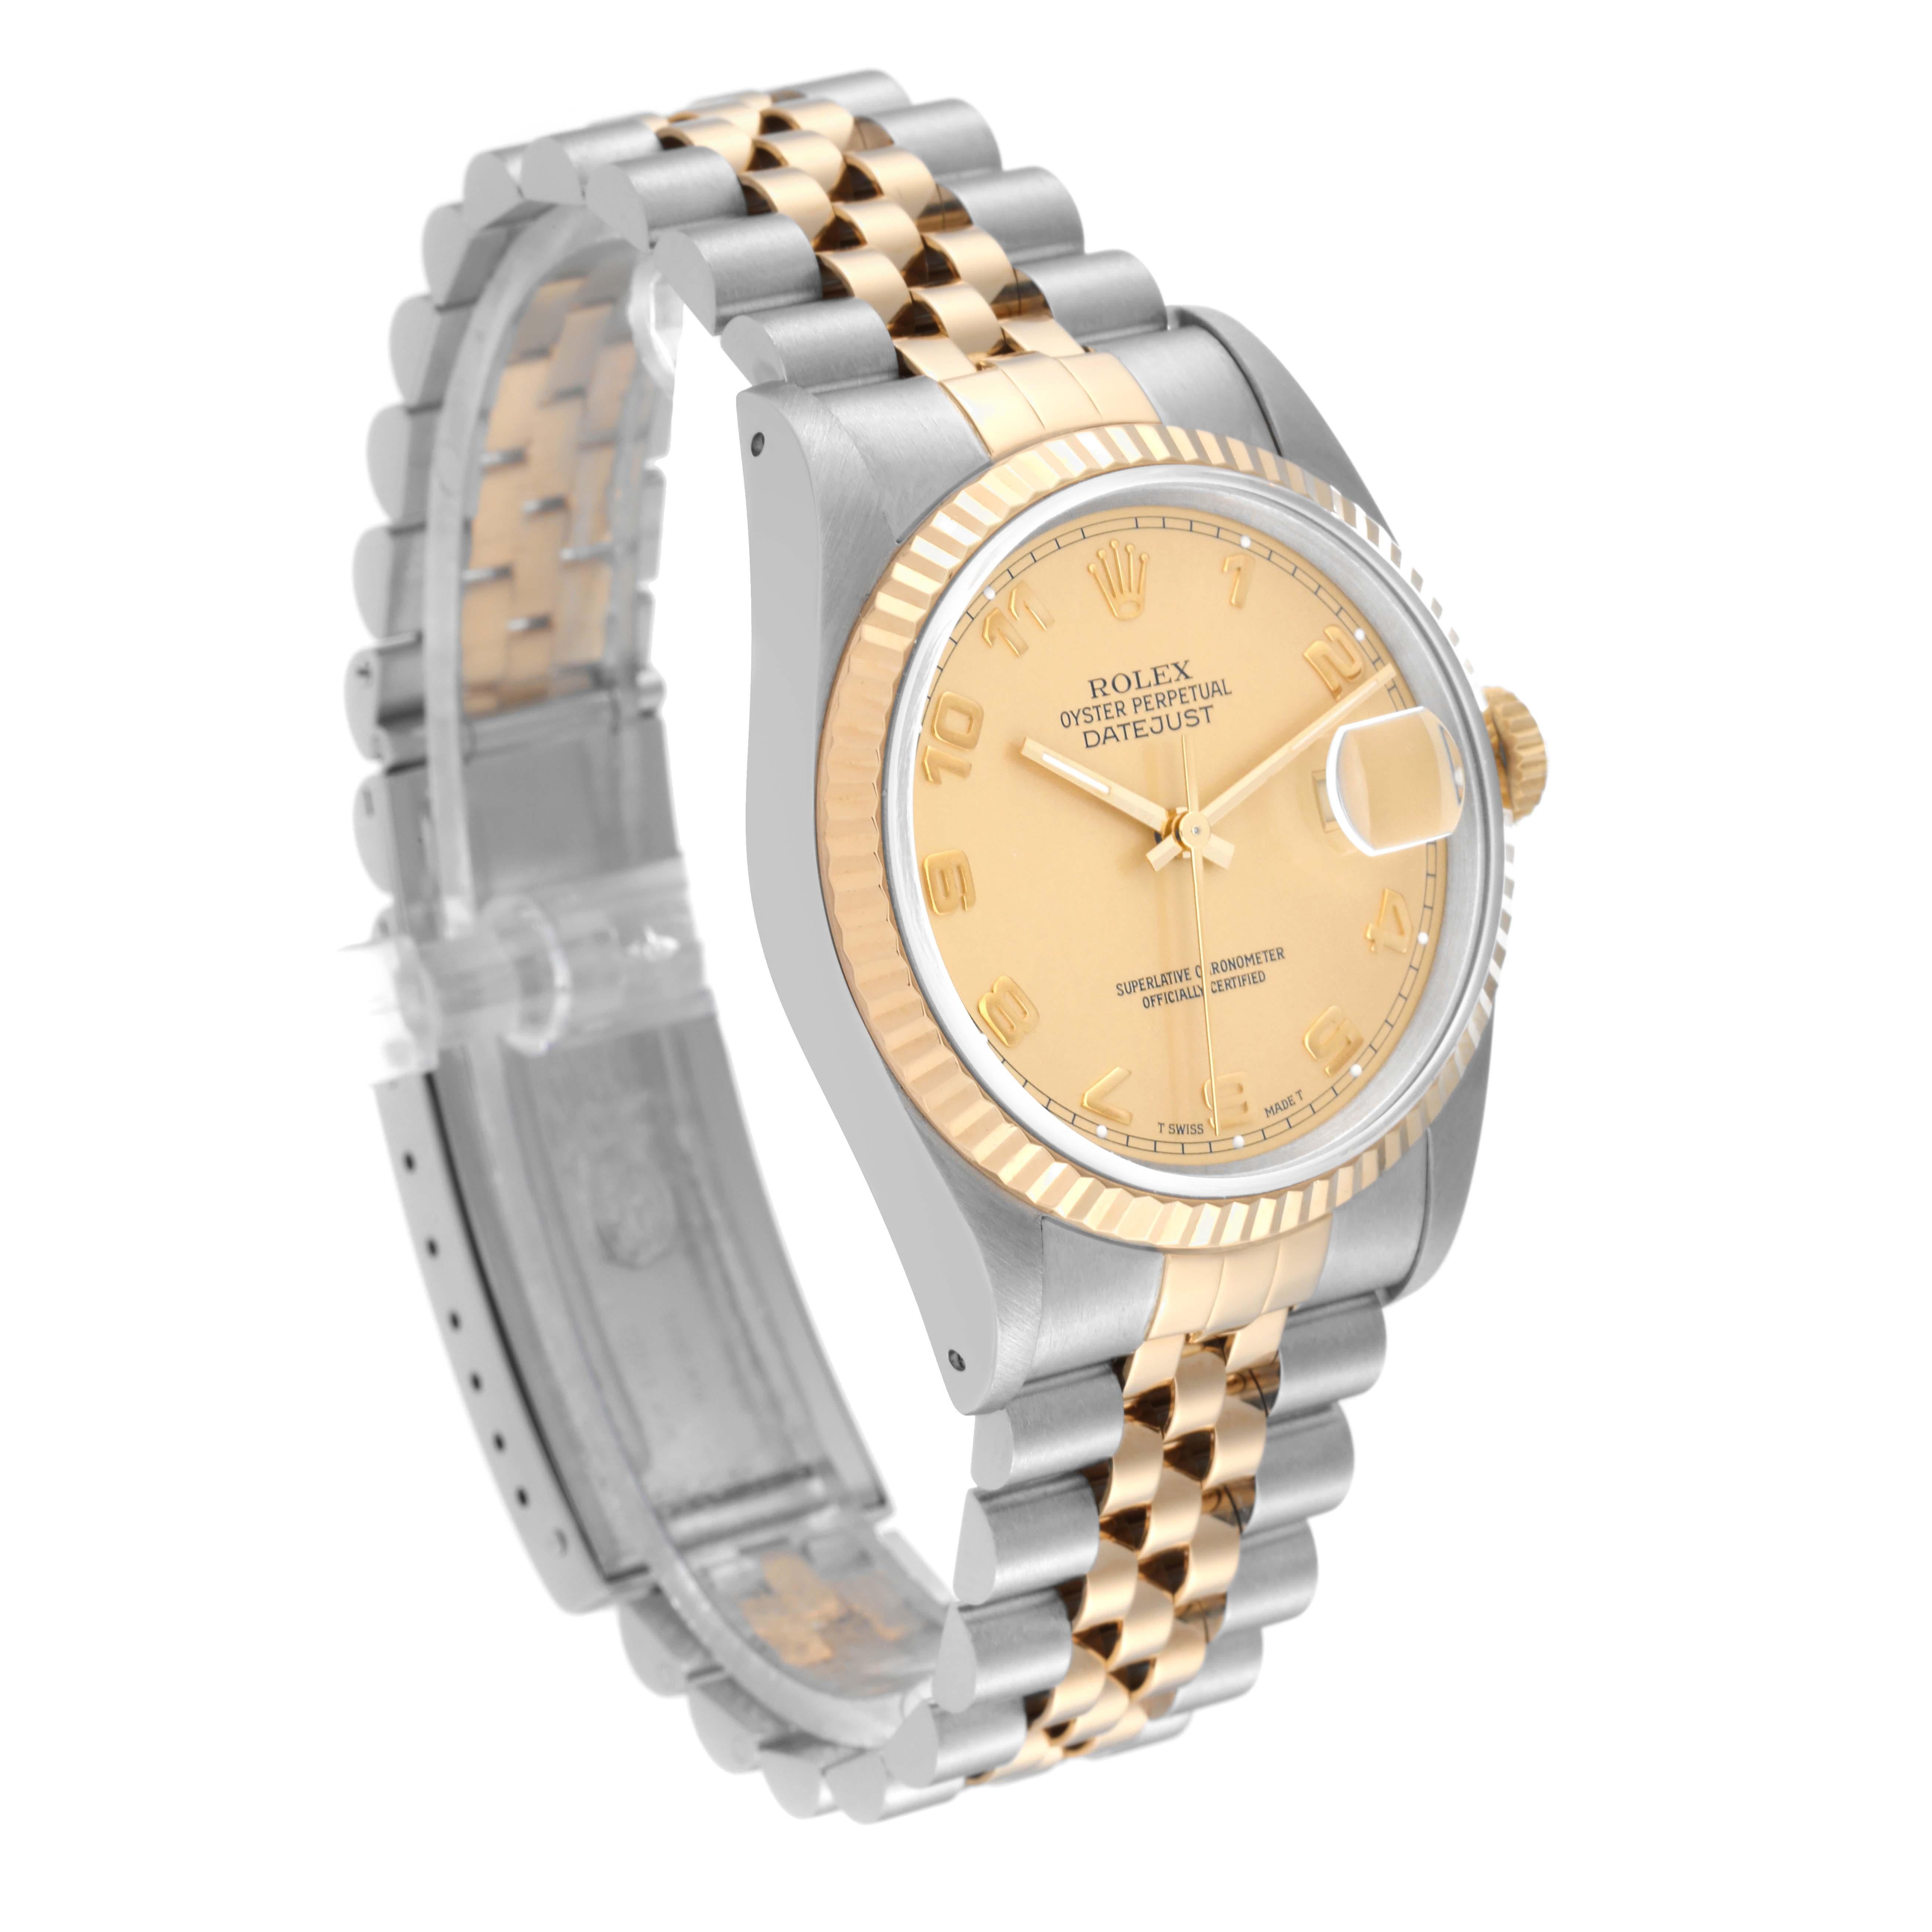 Rolex Datejust Steel Yellow Gold Champagne Arabic Dial Watch 16233 Box Papers In Good Condition For Sale In Atlanta, GA